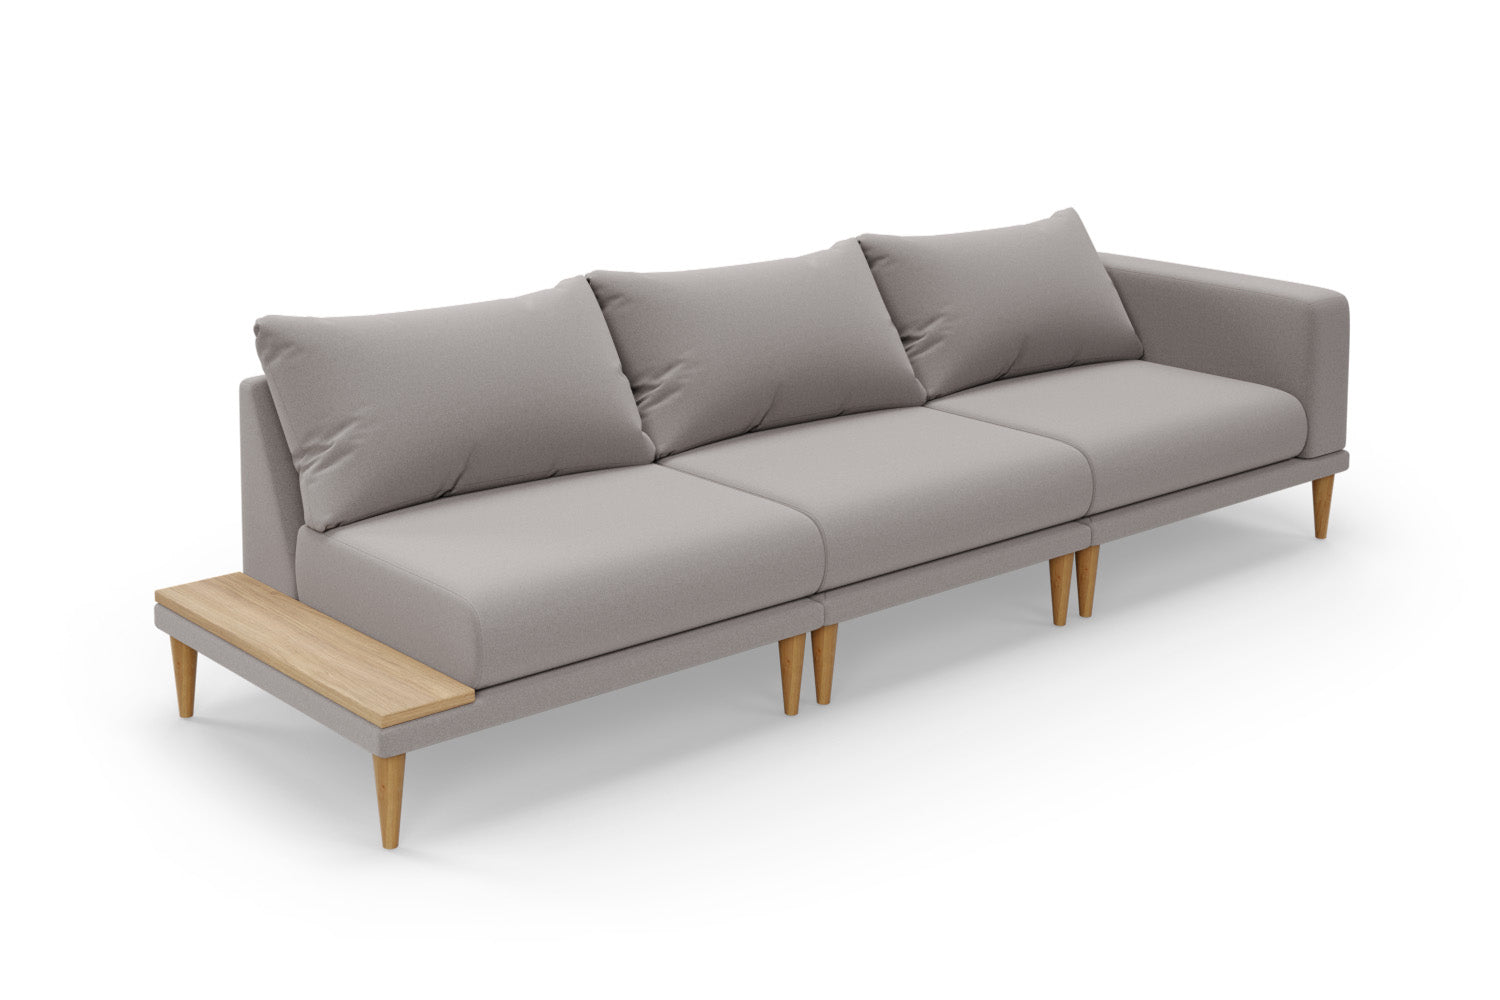 SNUG | The Maverick 4.5 Seater Sofa with 1 x Arm & 1 x Side Table in Ash Grey